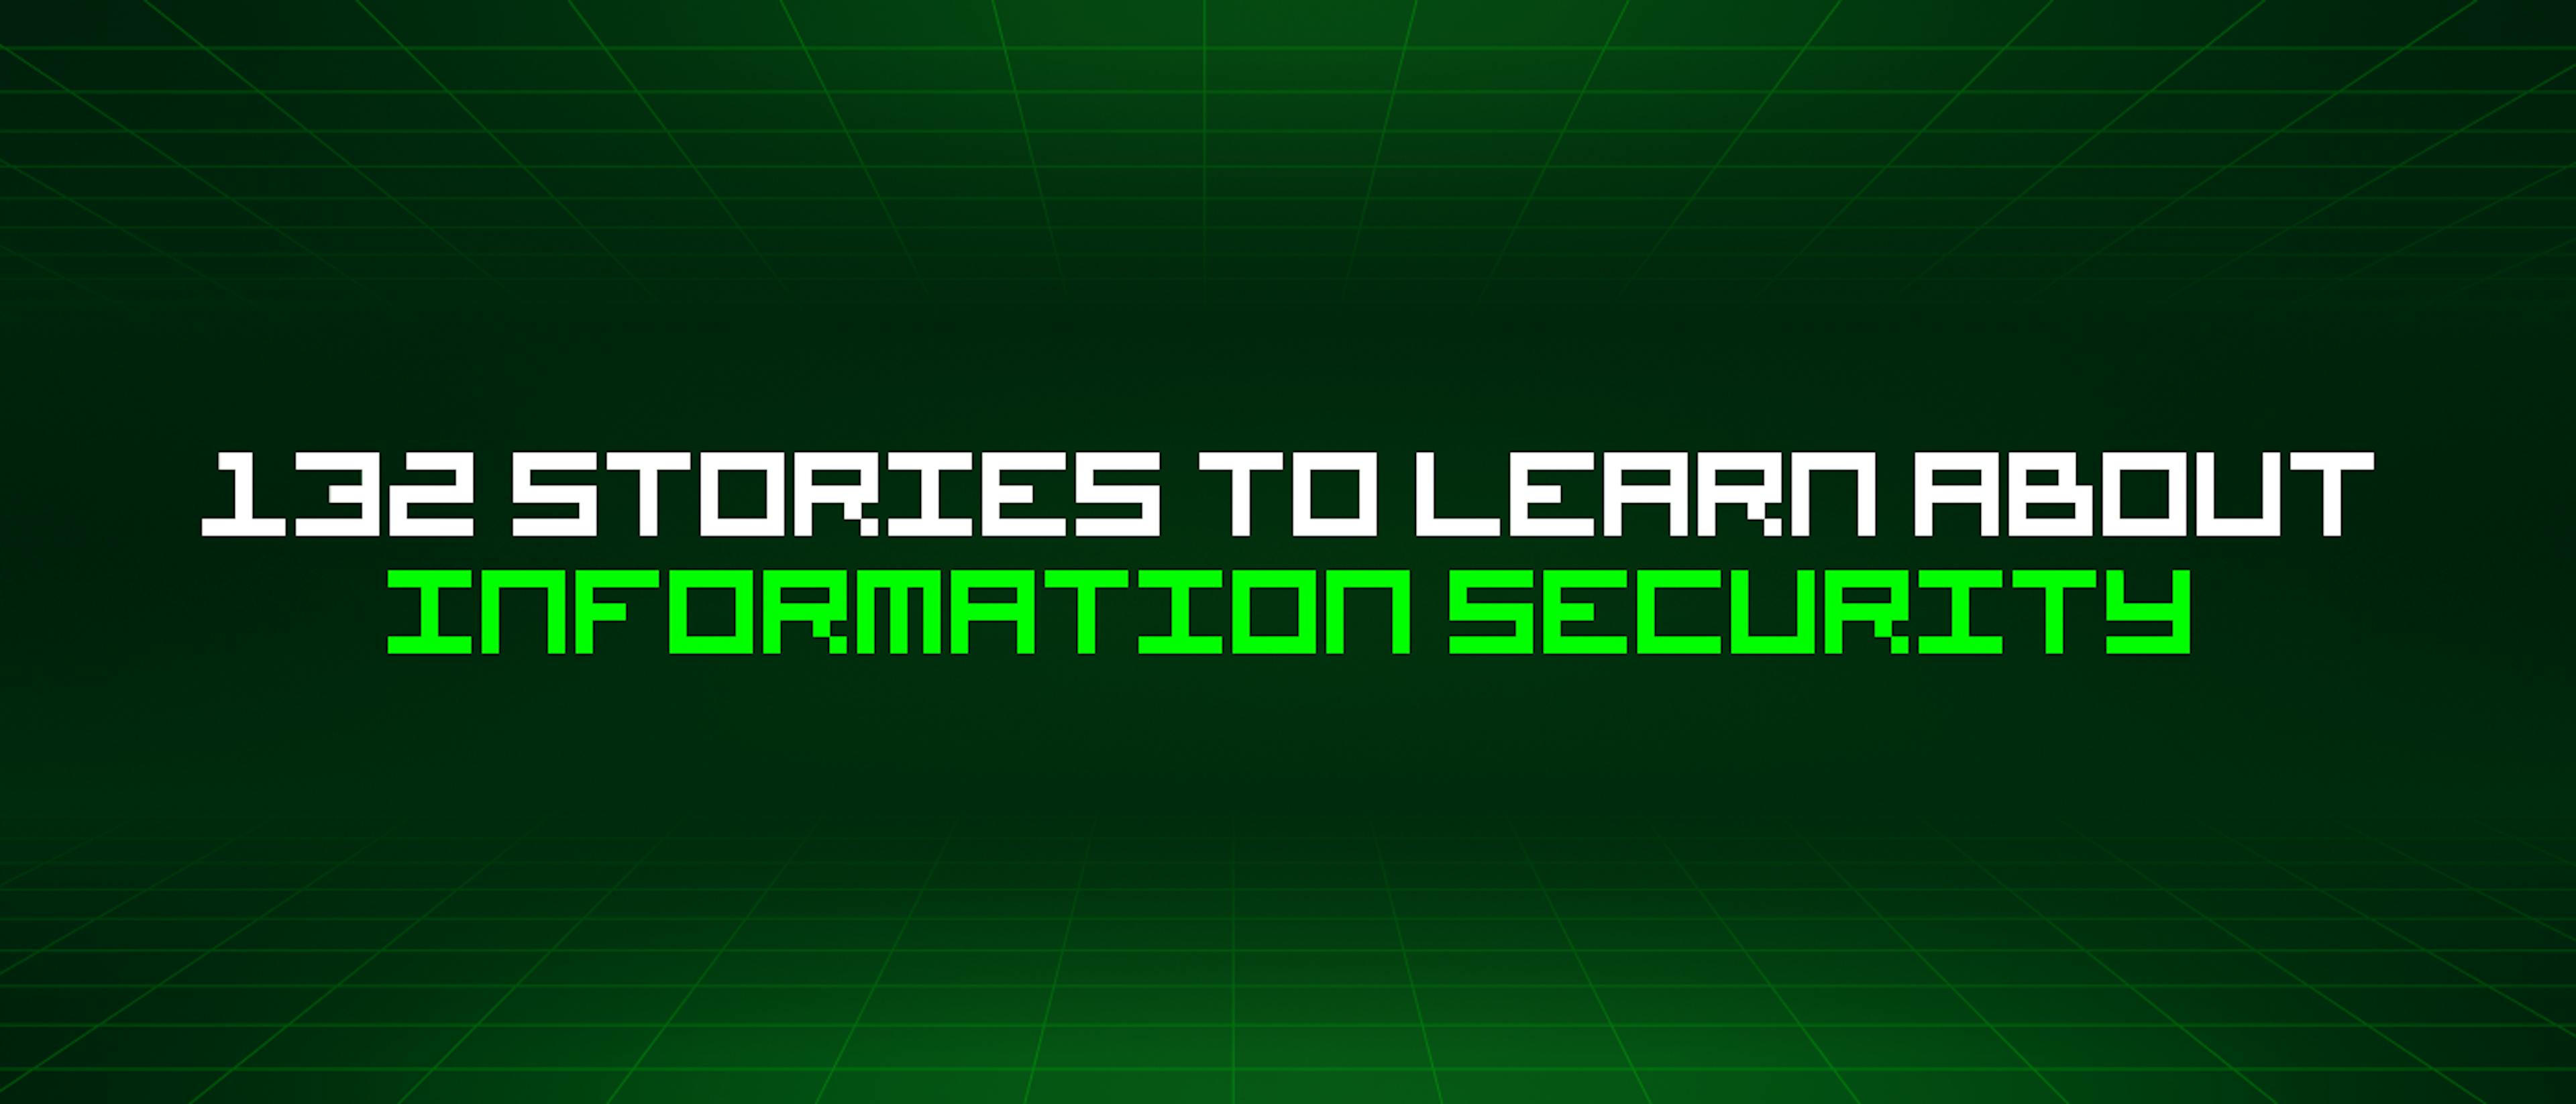 featured image - 132 Stories To Learn About Information Security